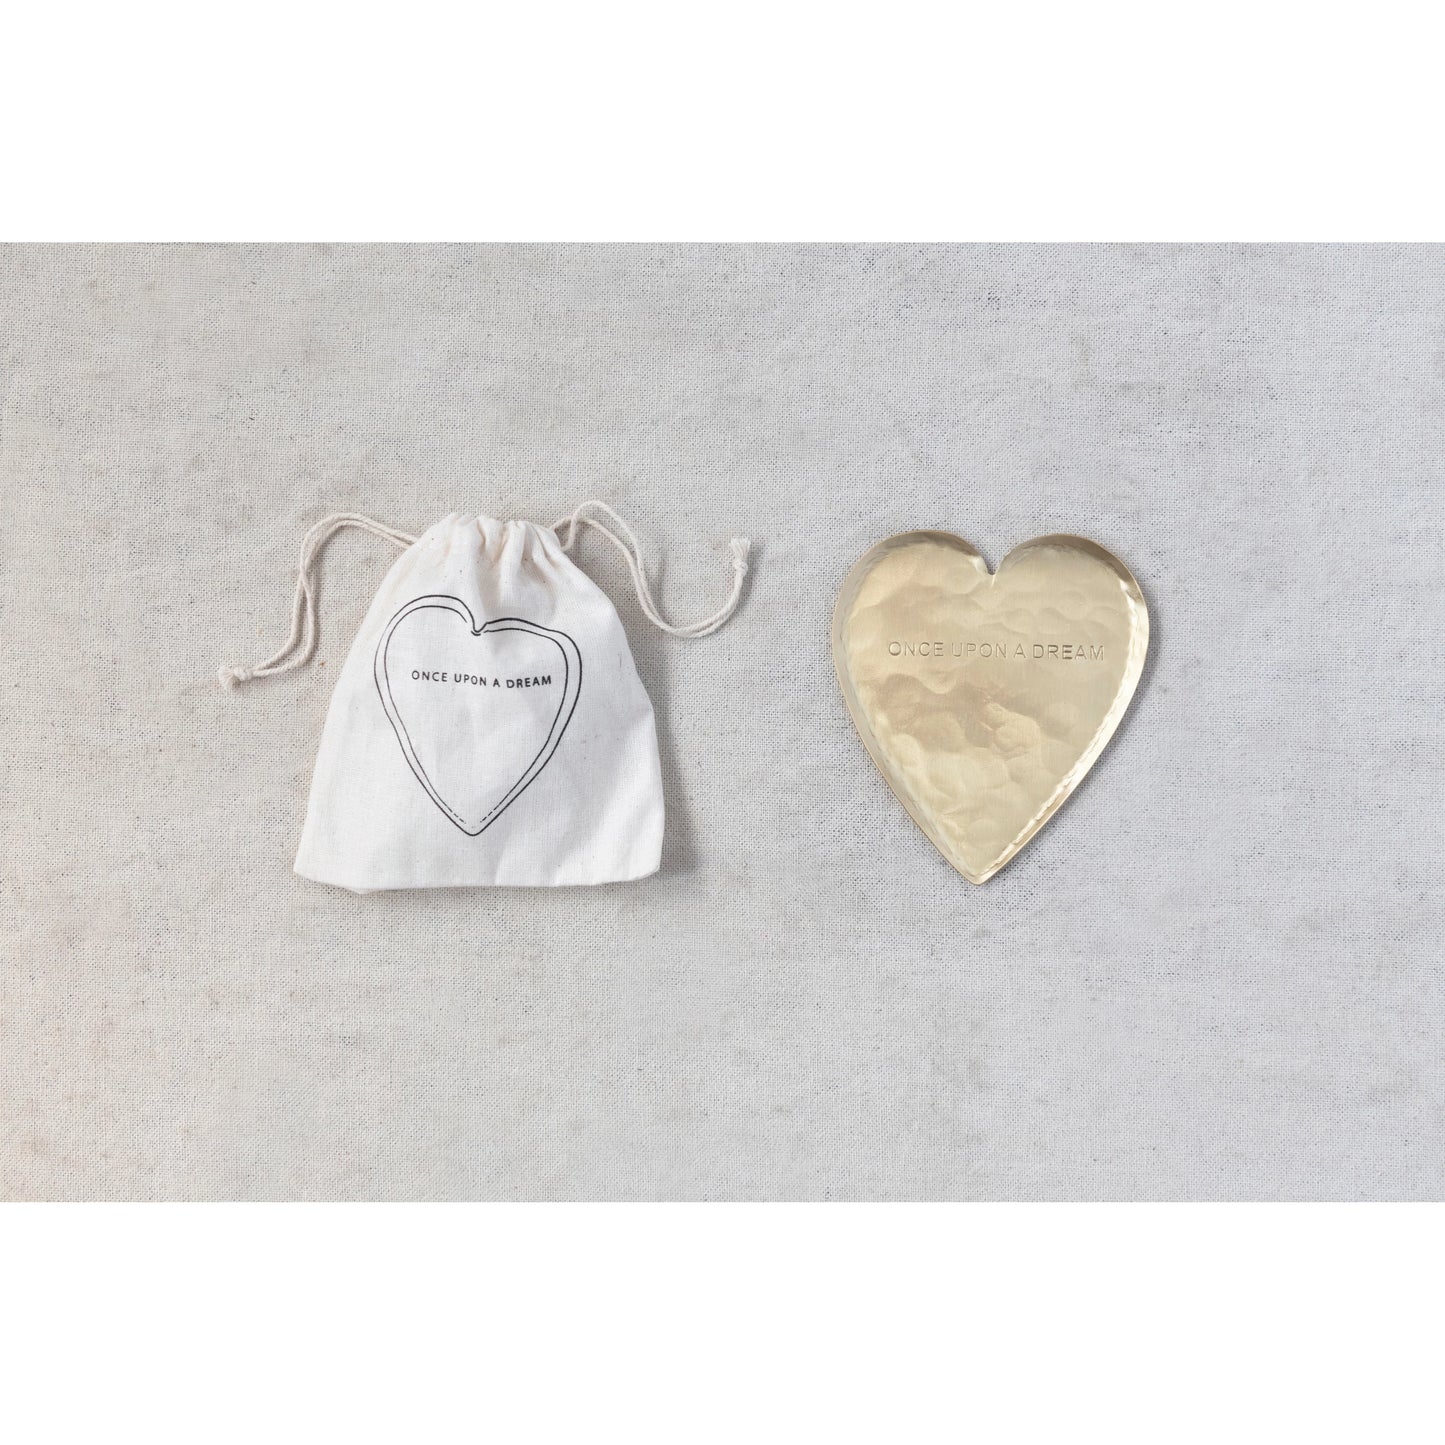 Decorative Hammered Brass Heart Shaped